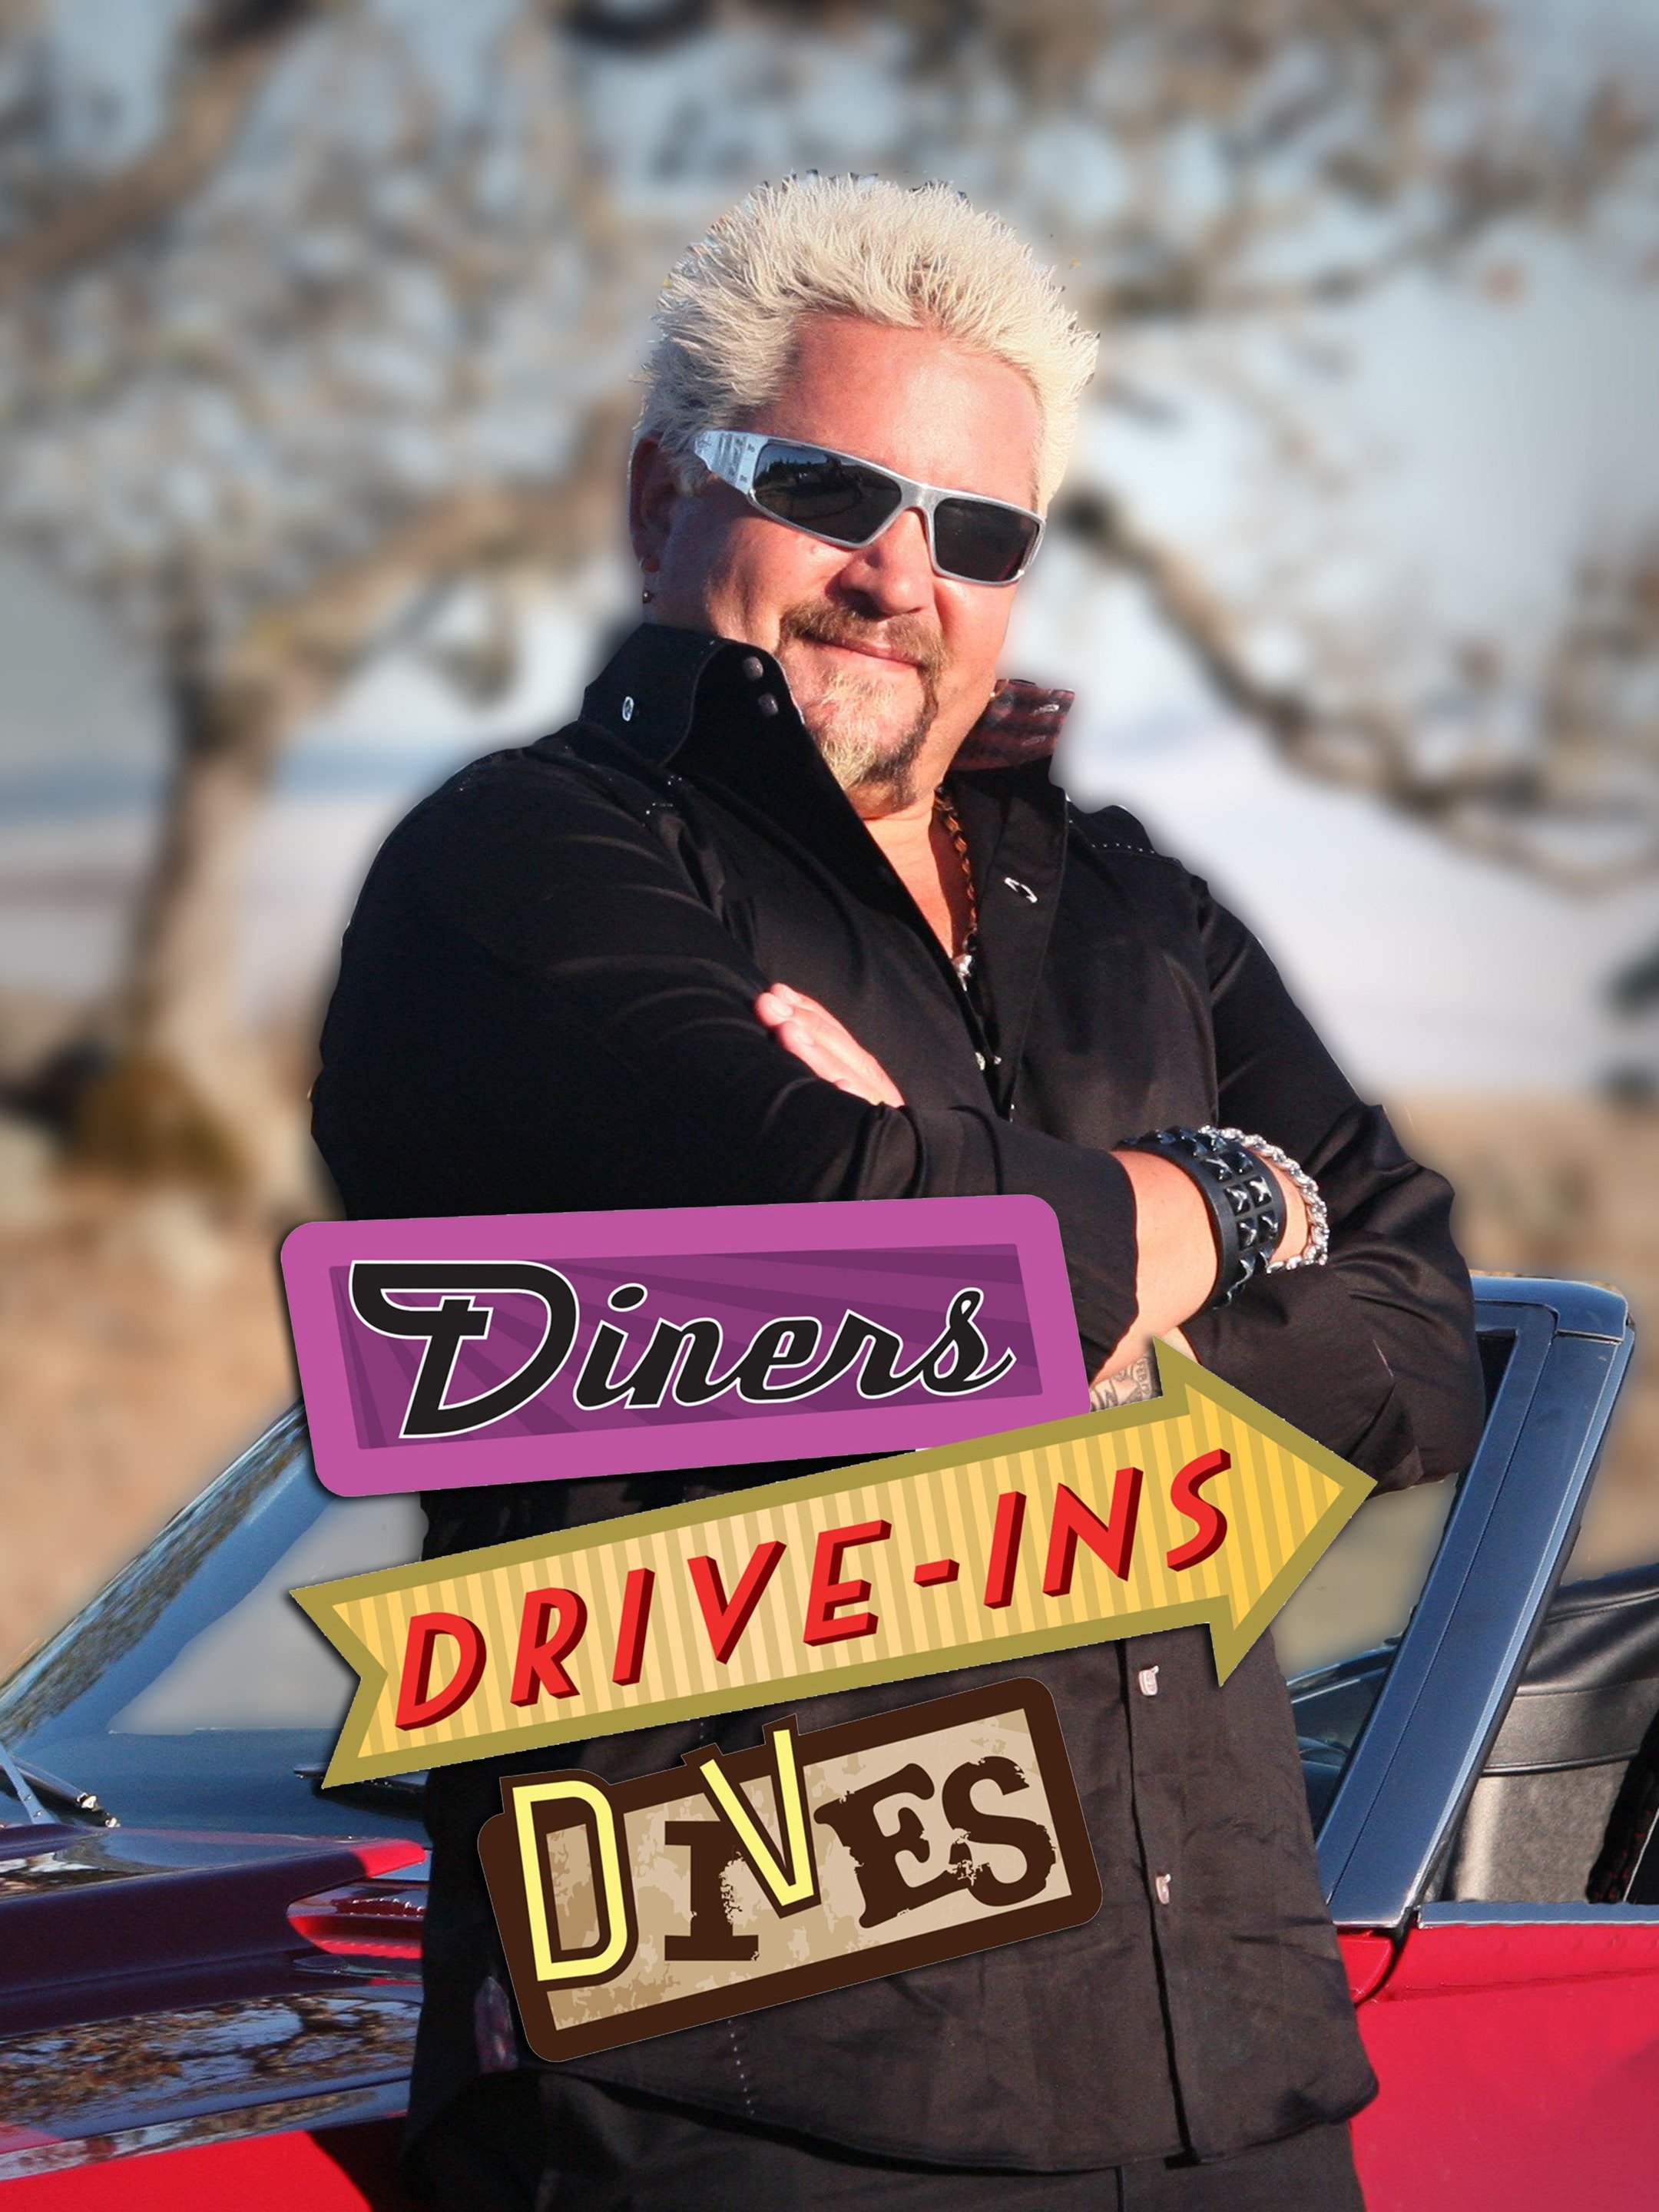 diners drive ins and dives las vegas